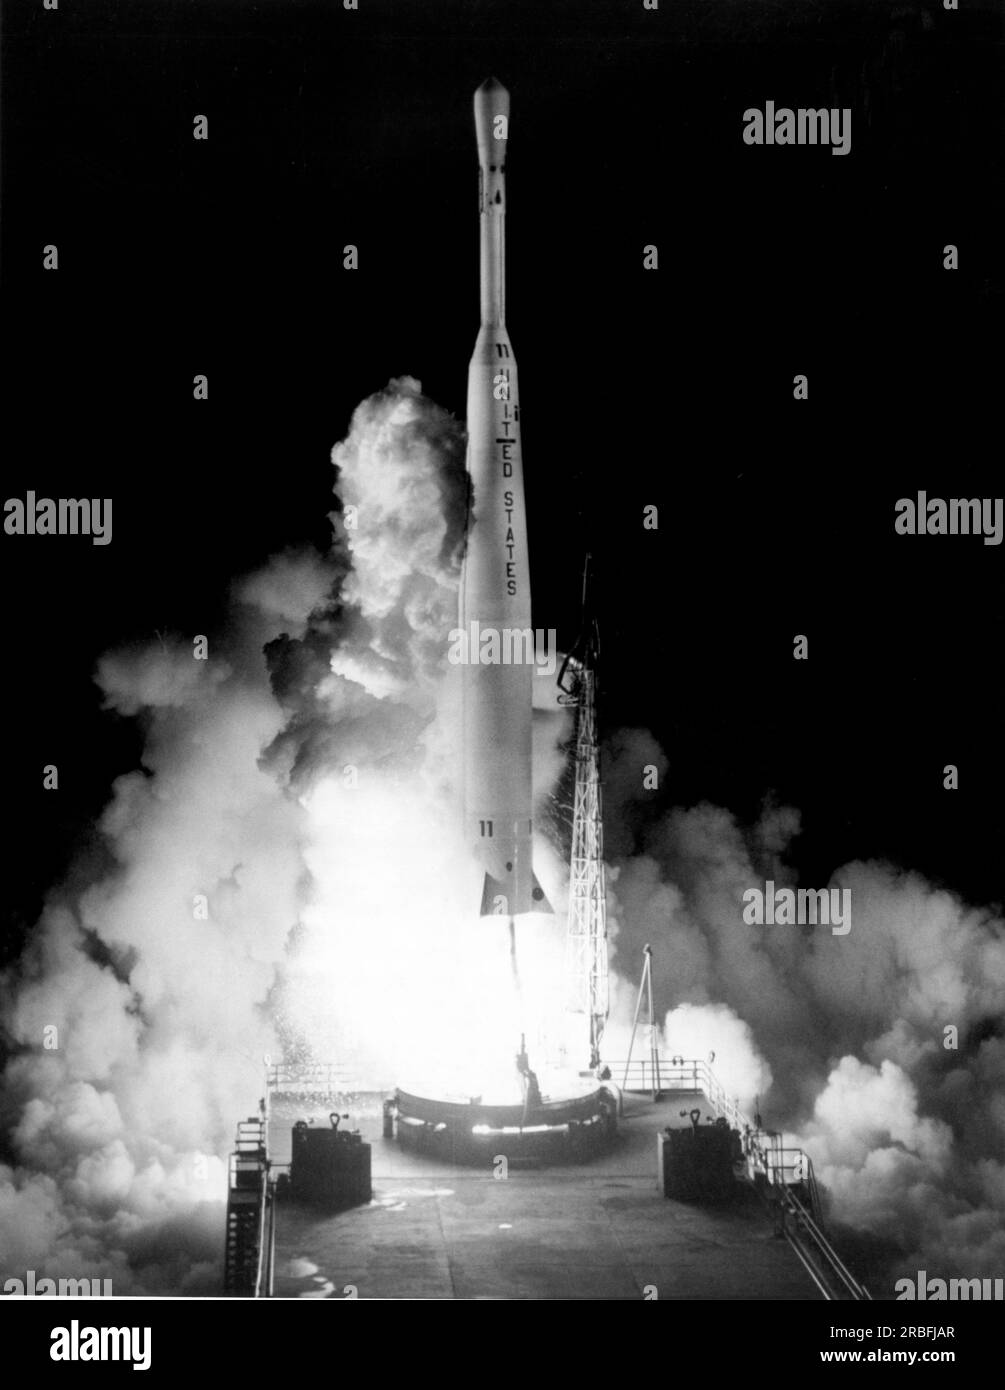 Cape Canaveral, Florida:  July 10, 1962 A Thor Delta rocket blasts off carrying Telstar 1, the world's first international communications satellite in its nose. Stock Photo